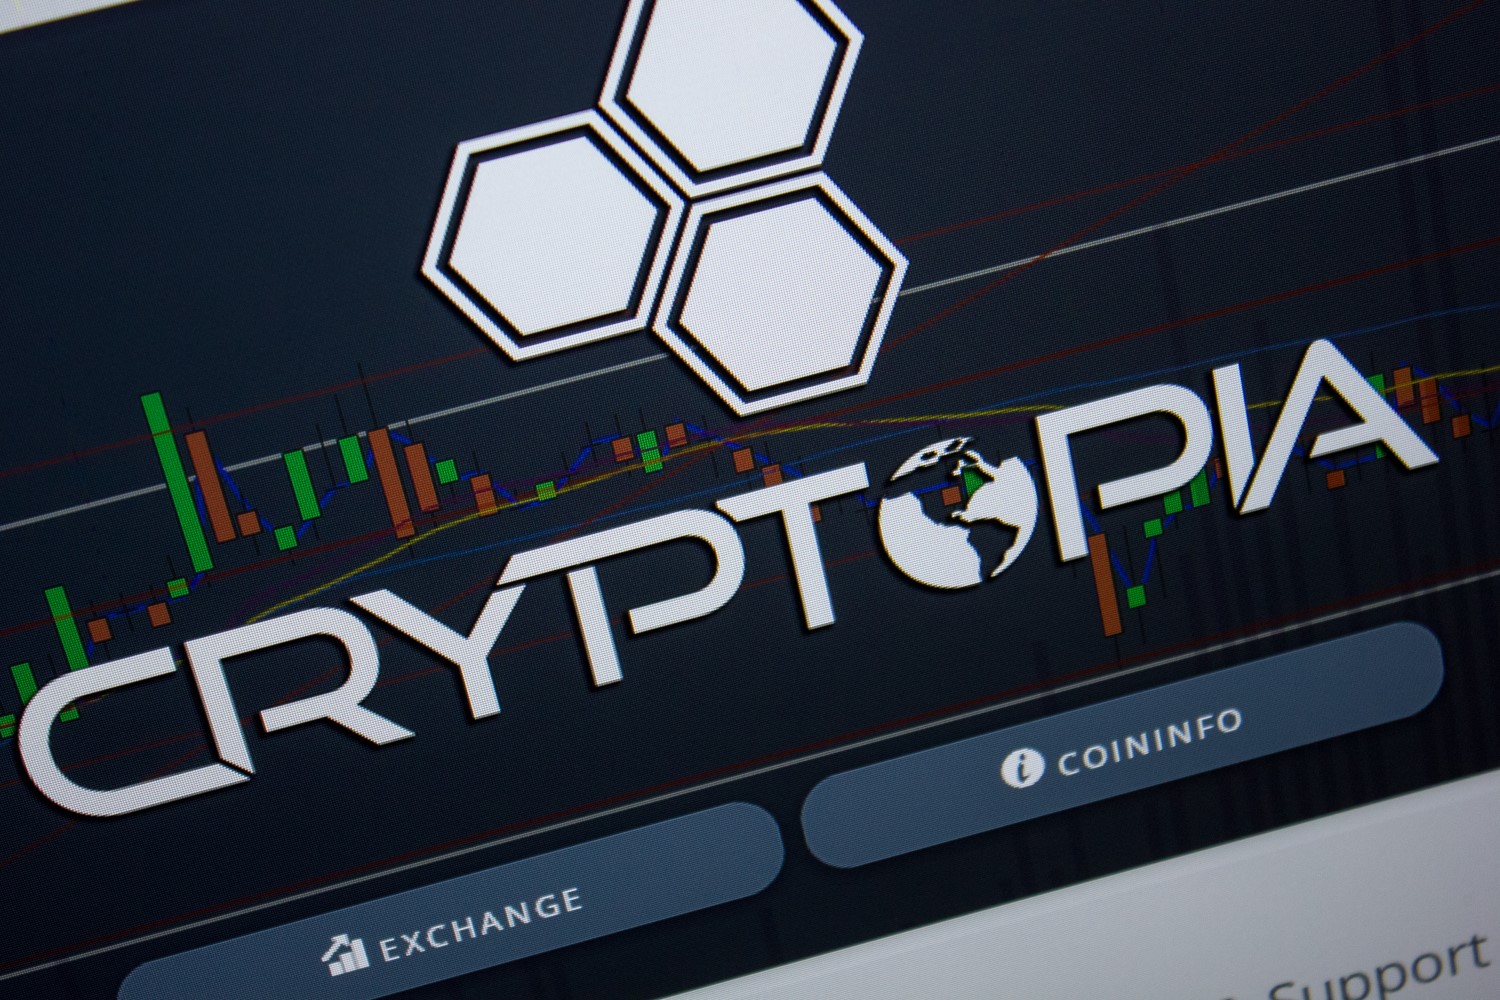 Cryptopia-users-can-claim-assets-from-end-of-2020,-says-hacked-exchange’s-liquidator